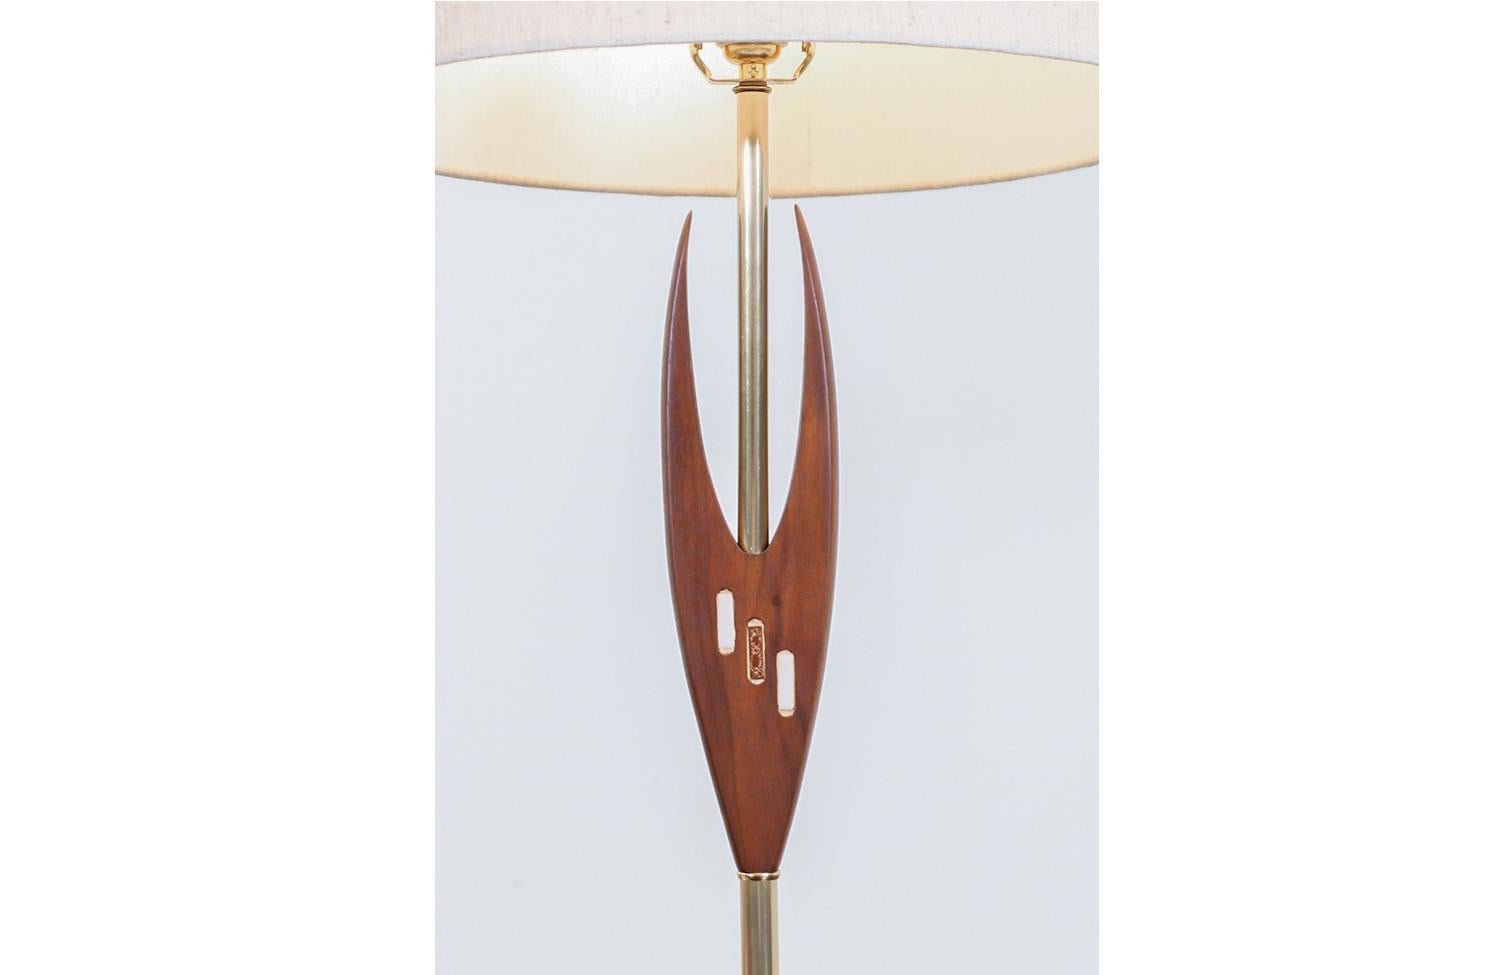 American Midcentury Sculpted Walnut and Inlaid Tile Table Lamps